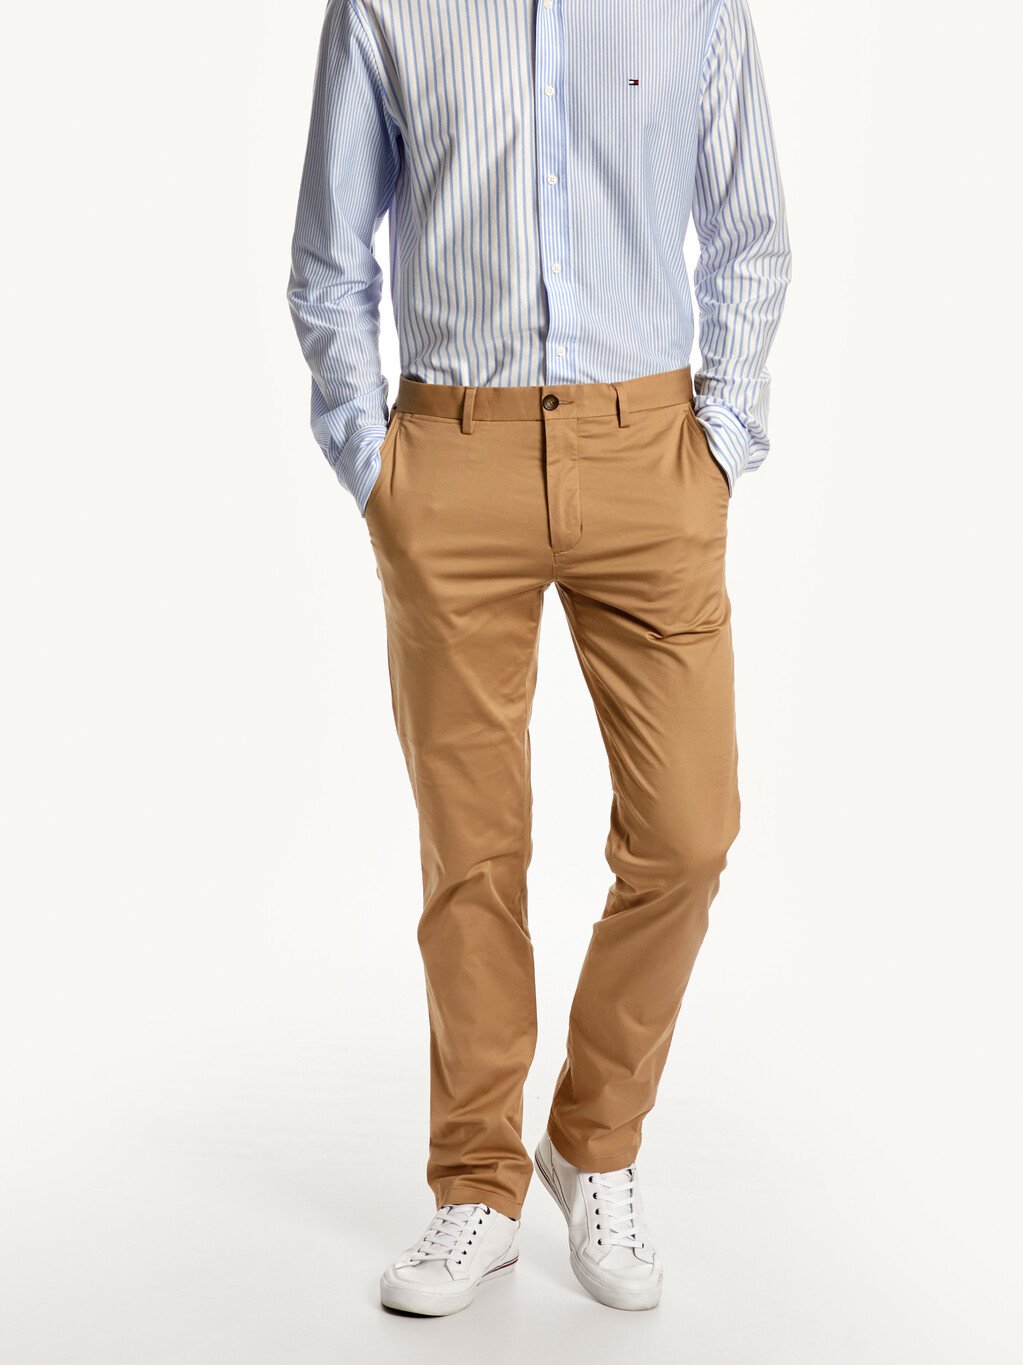 Denton Chino Straight Fit Stretch Pants, Beige, hi-res